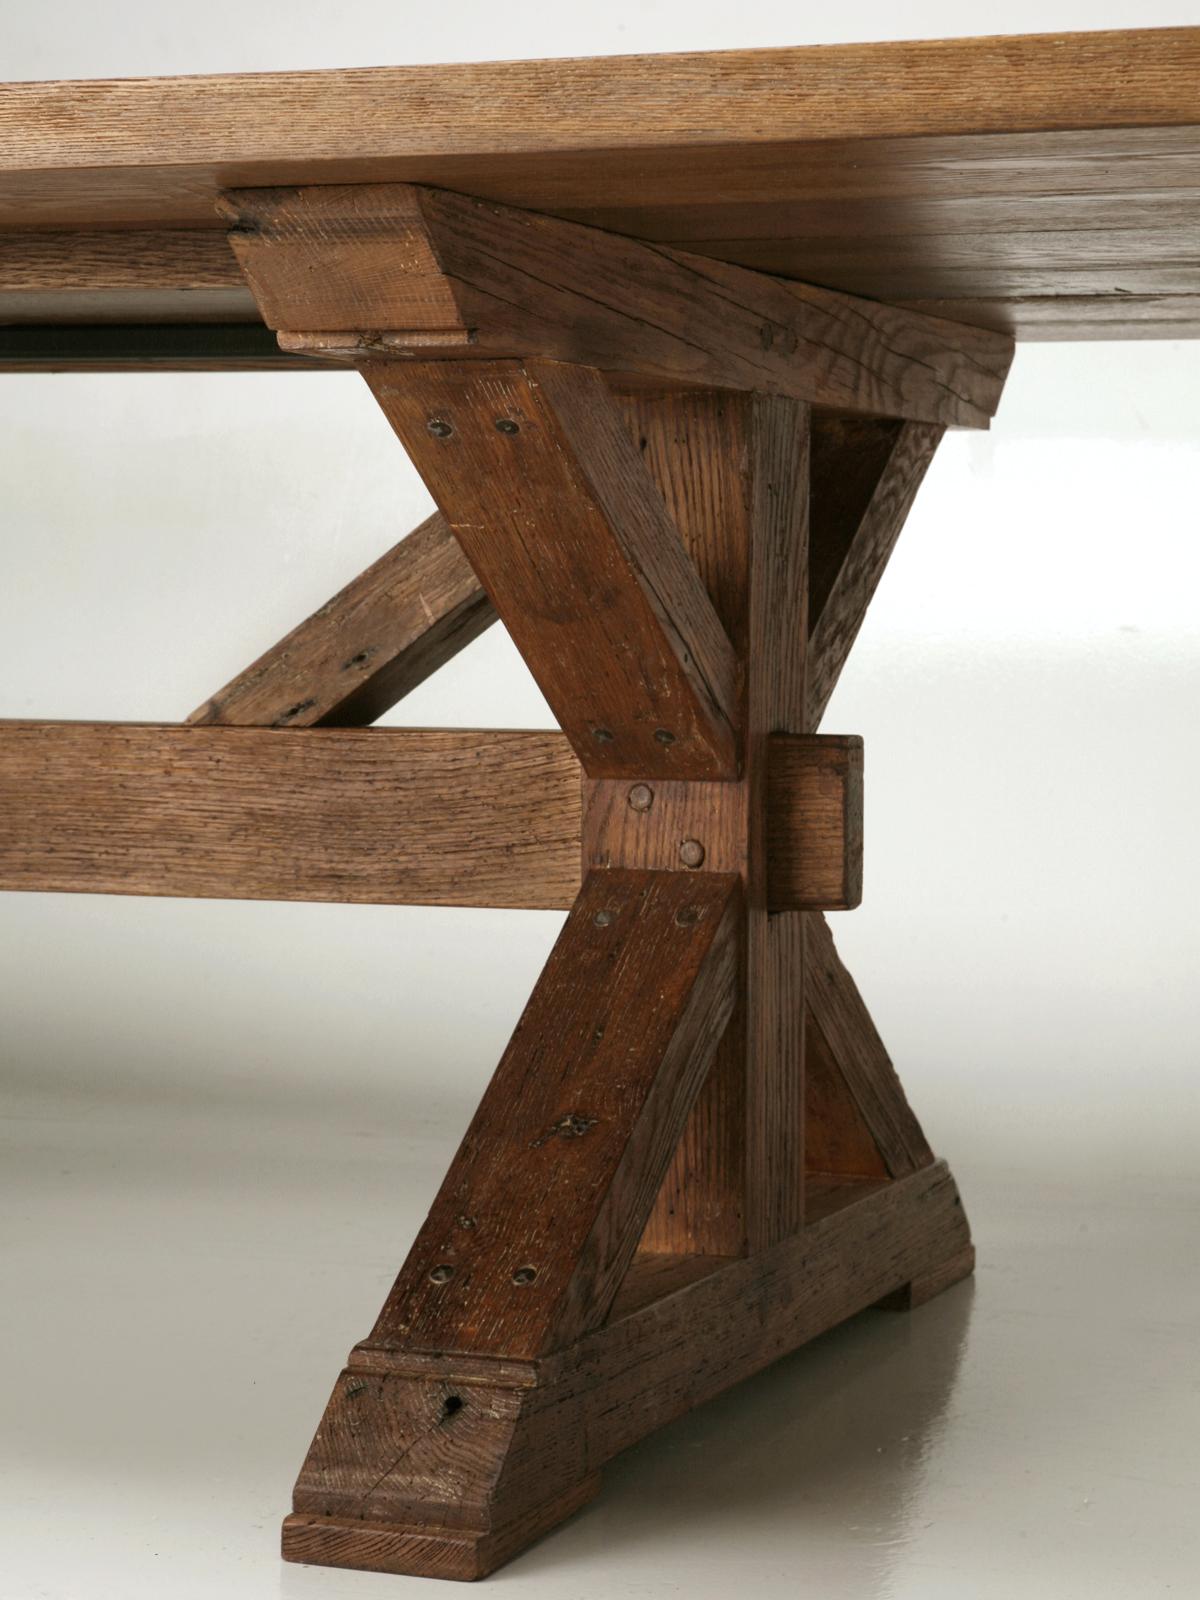 Country French Inspired Dining or Farm Table Reclaimed Oak Made to Order Any Size, Color For Sale